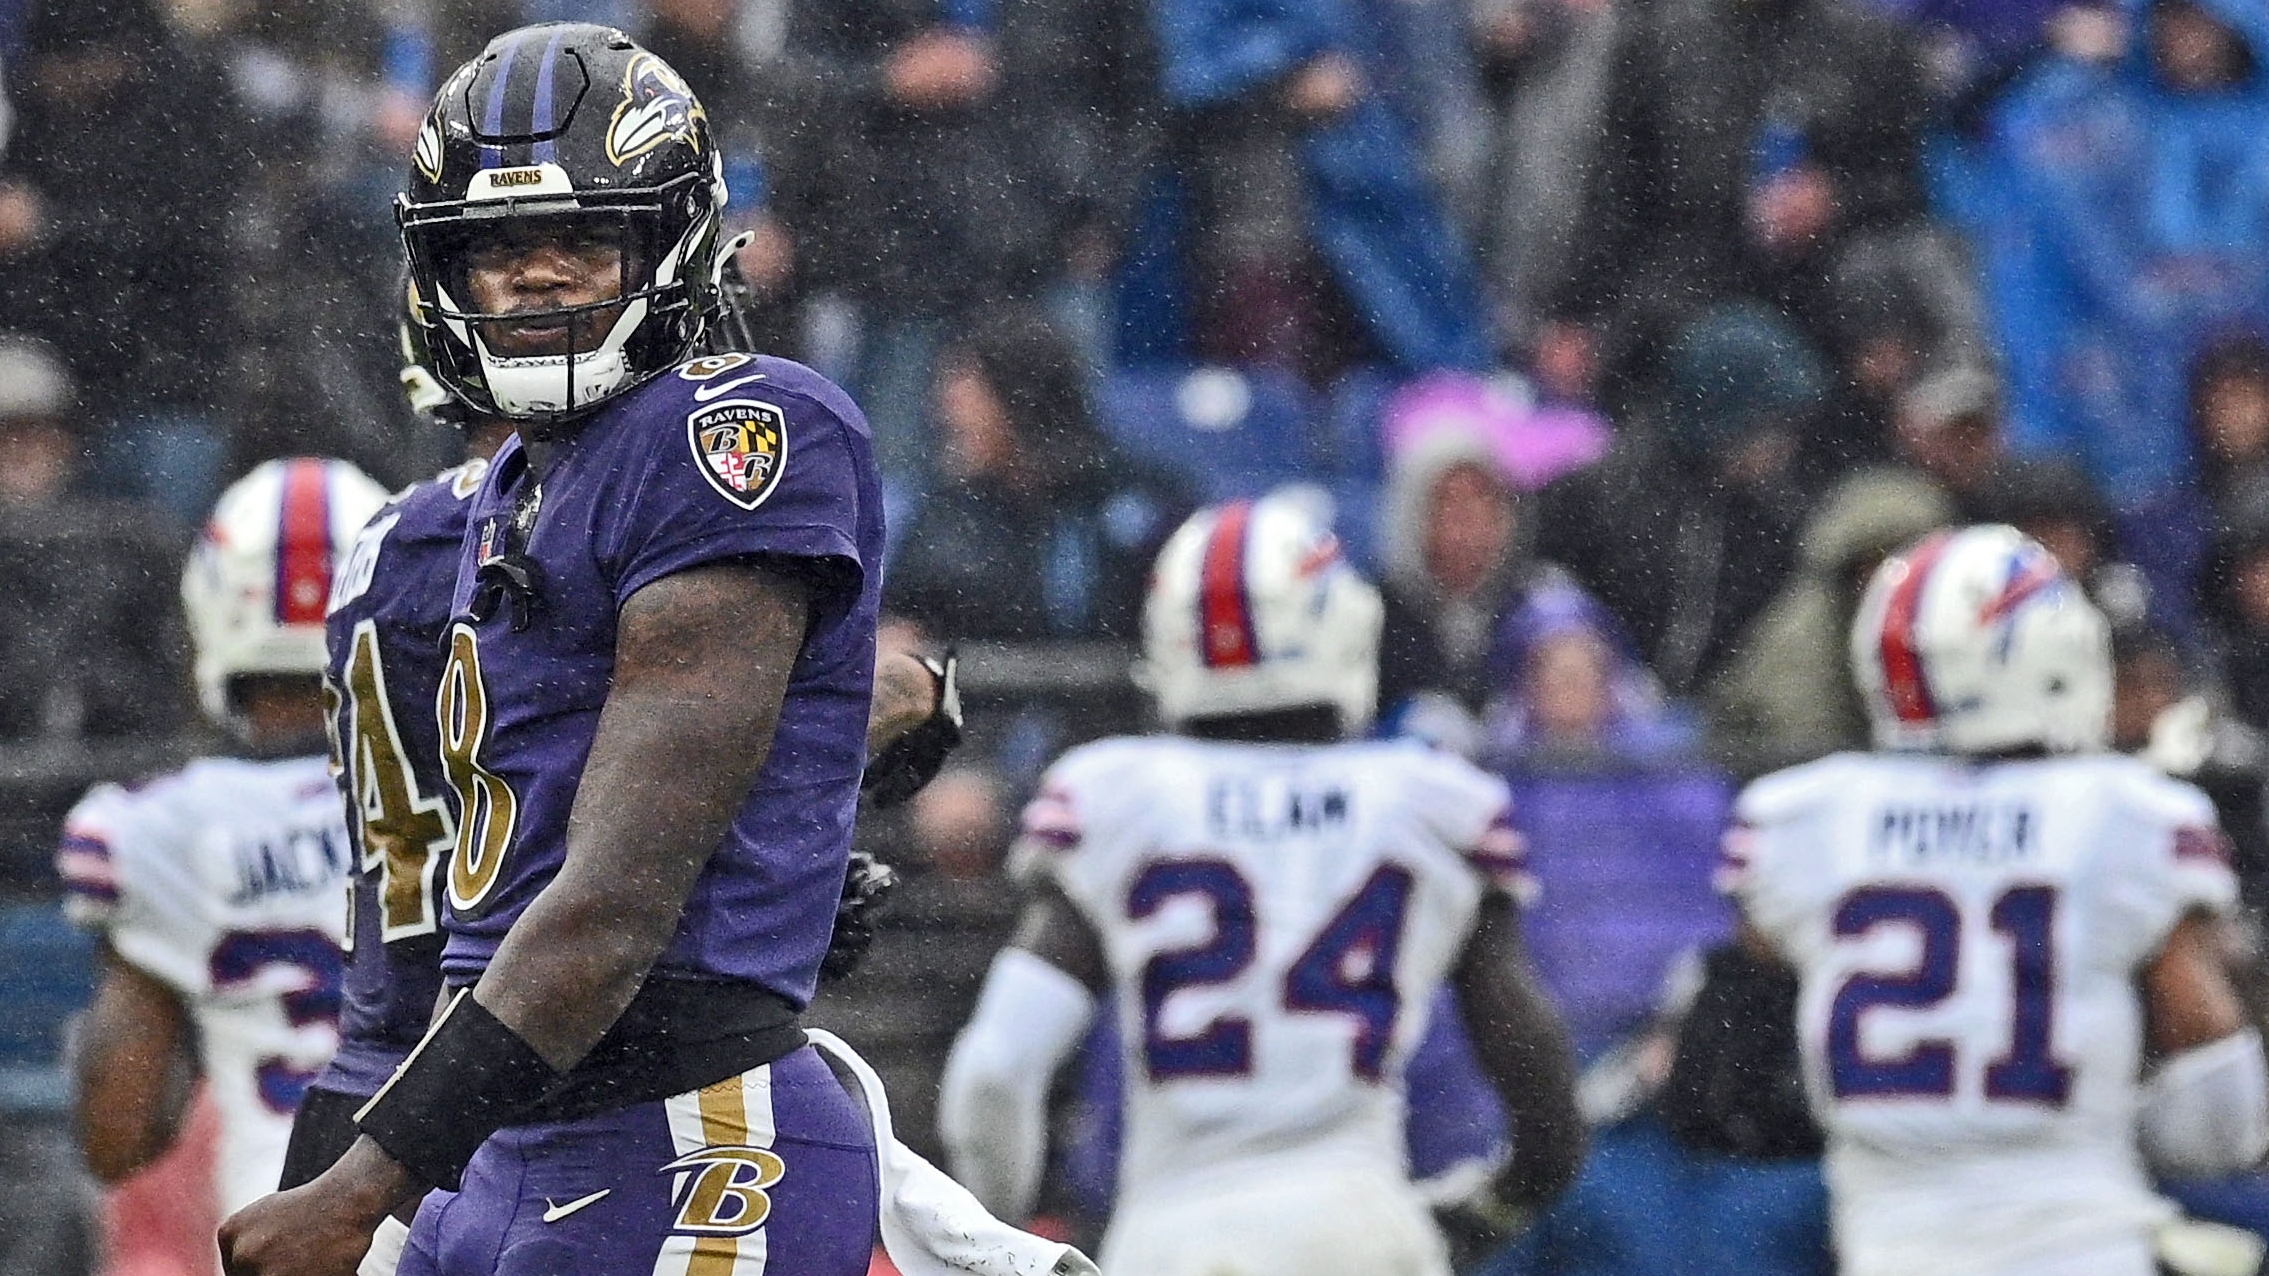 Five things we learned from the Ravens' 23-20 loss to the Buffalo Bills